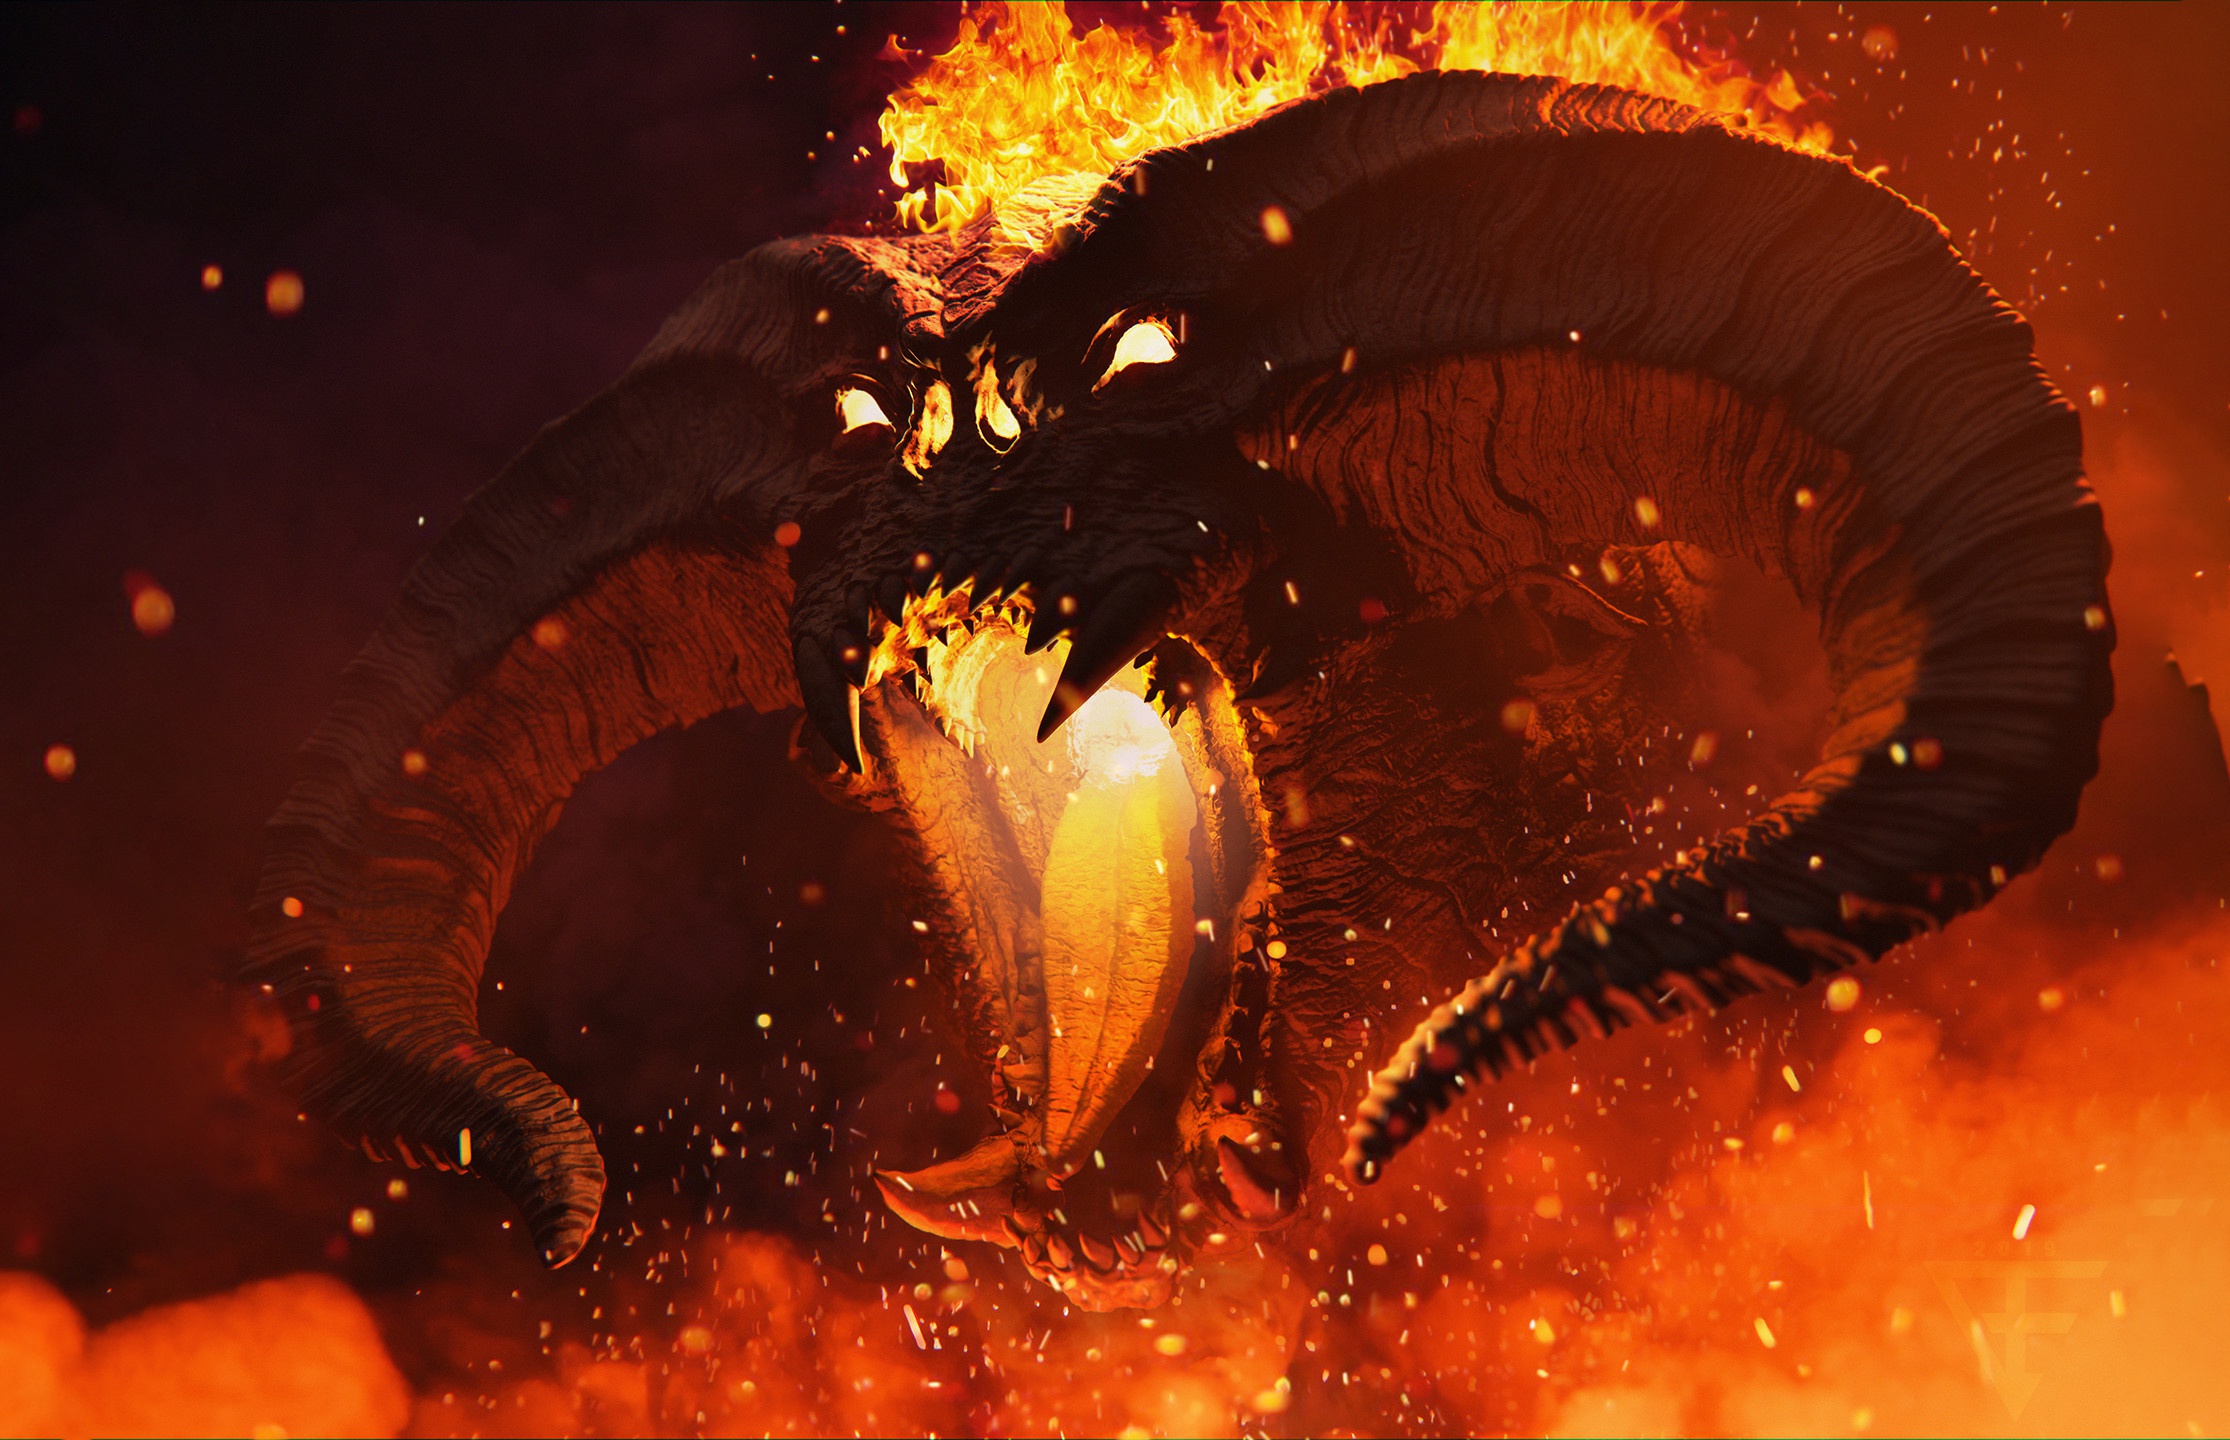 Balrog Demon The Lord Of The Rings Fantasy Art Creature 2230x1440